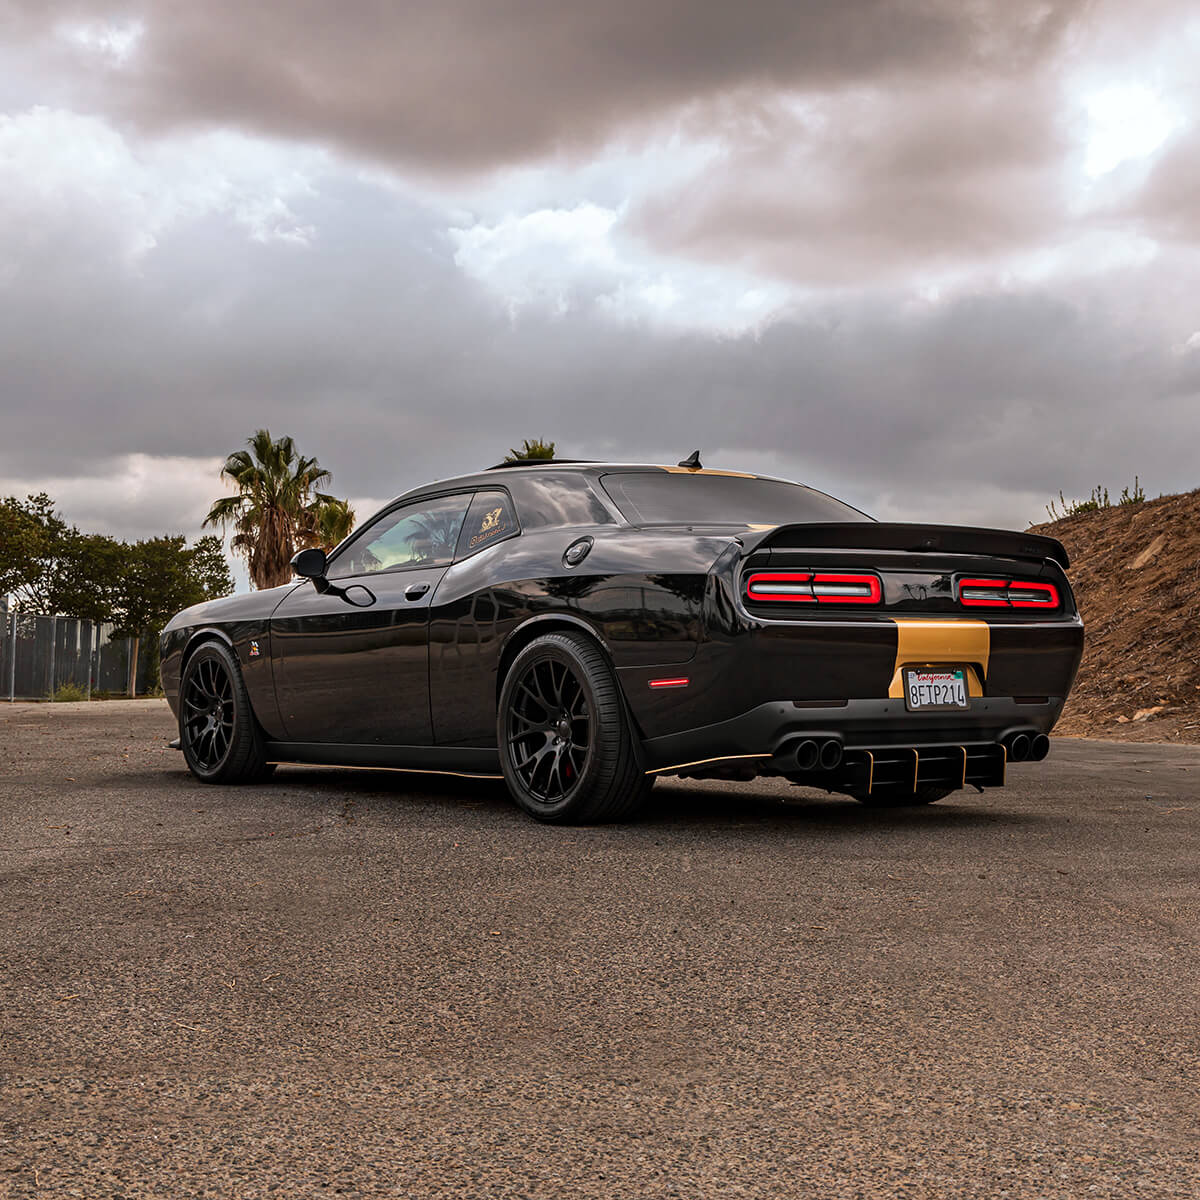 Dodge challenger RT rear diffuser with yellow guards